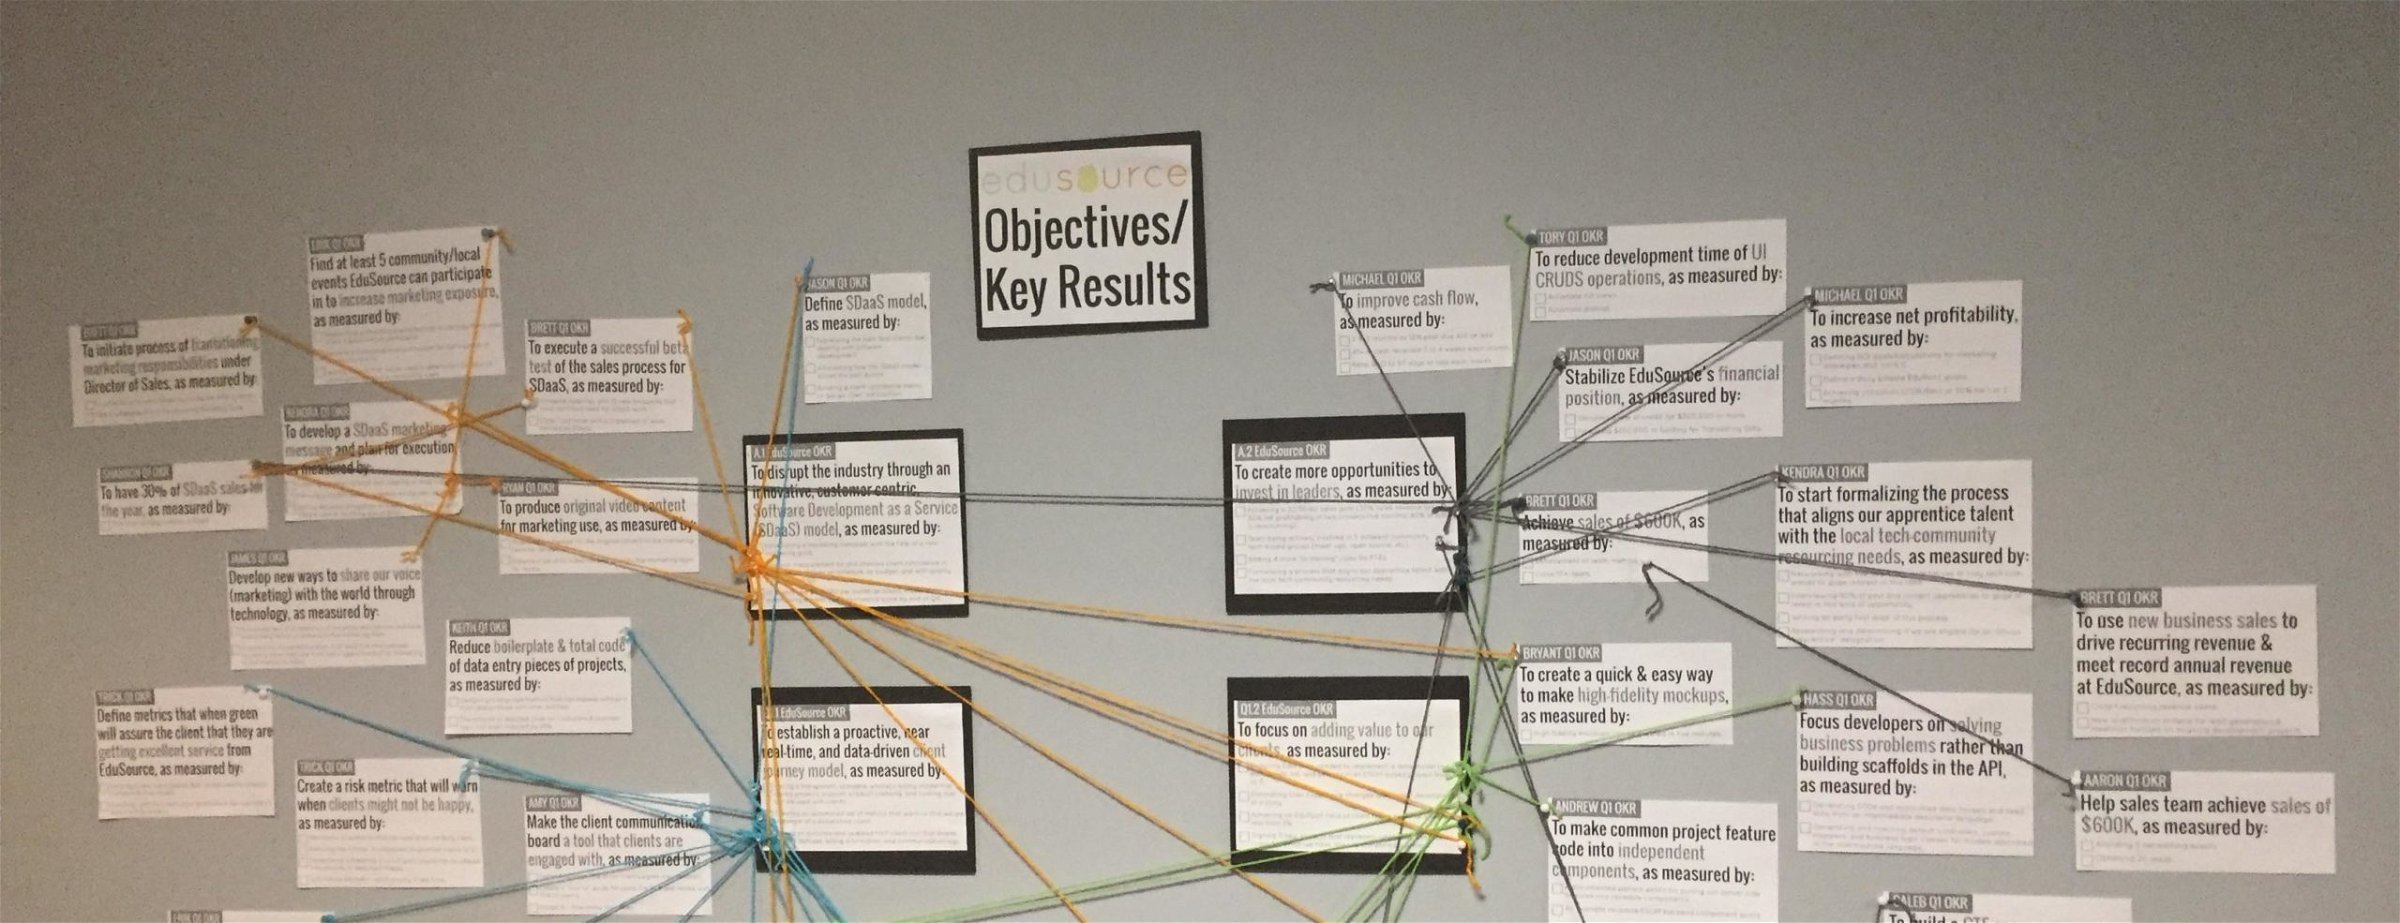 Objectives / Key Results at RoboSource